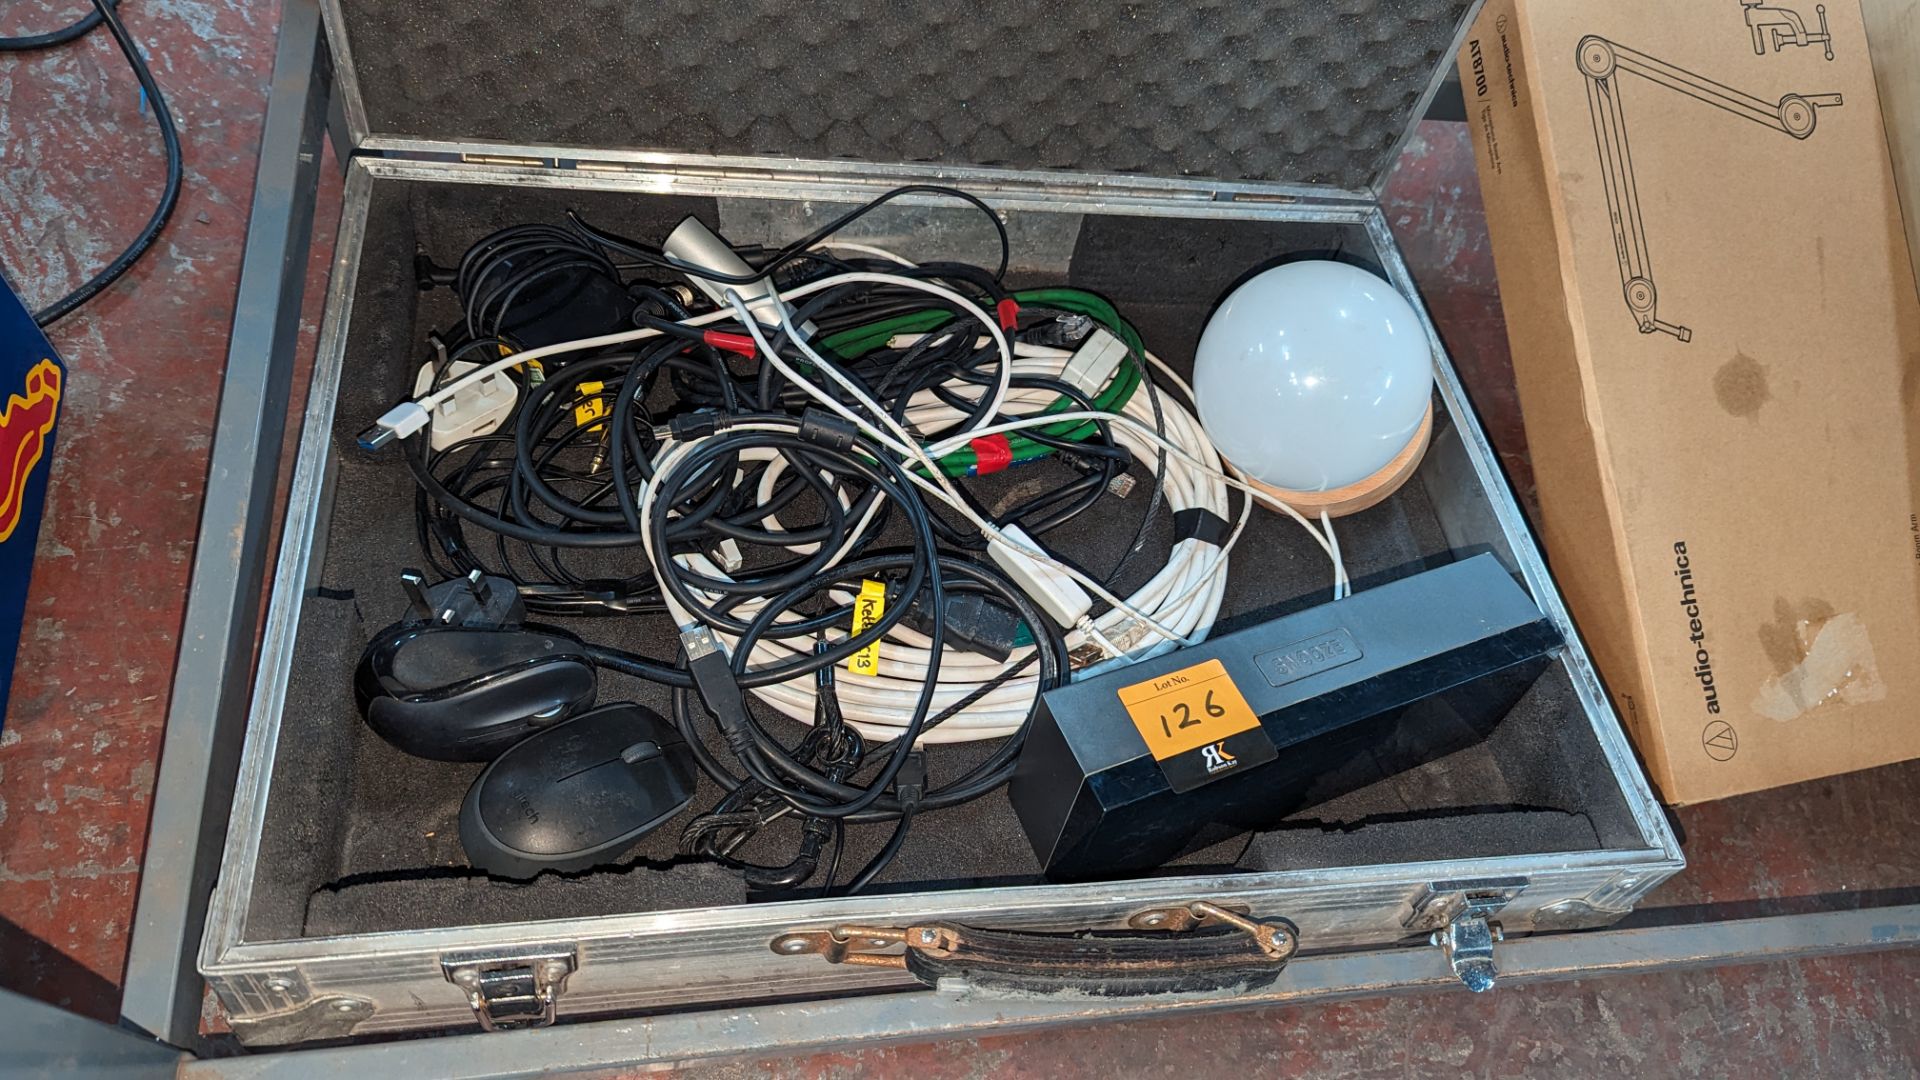 Flight case and contents of assorted cables and miscellaneous items - Image 4 of 6